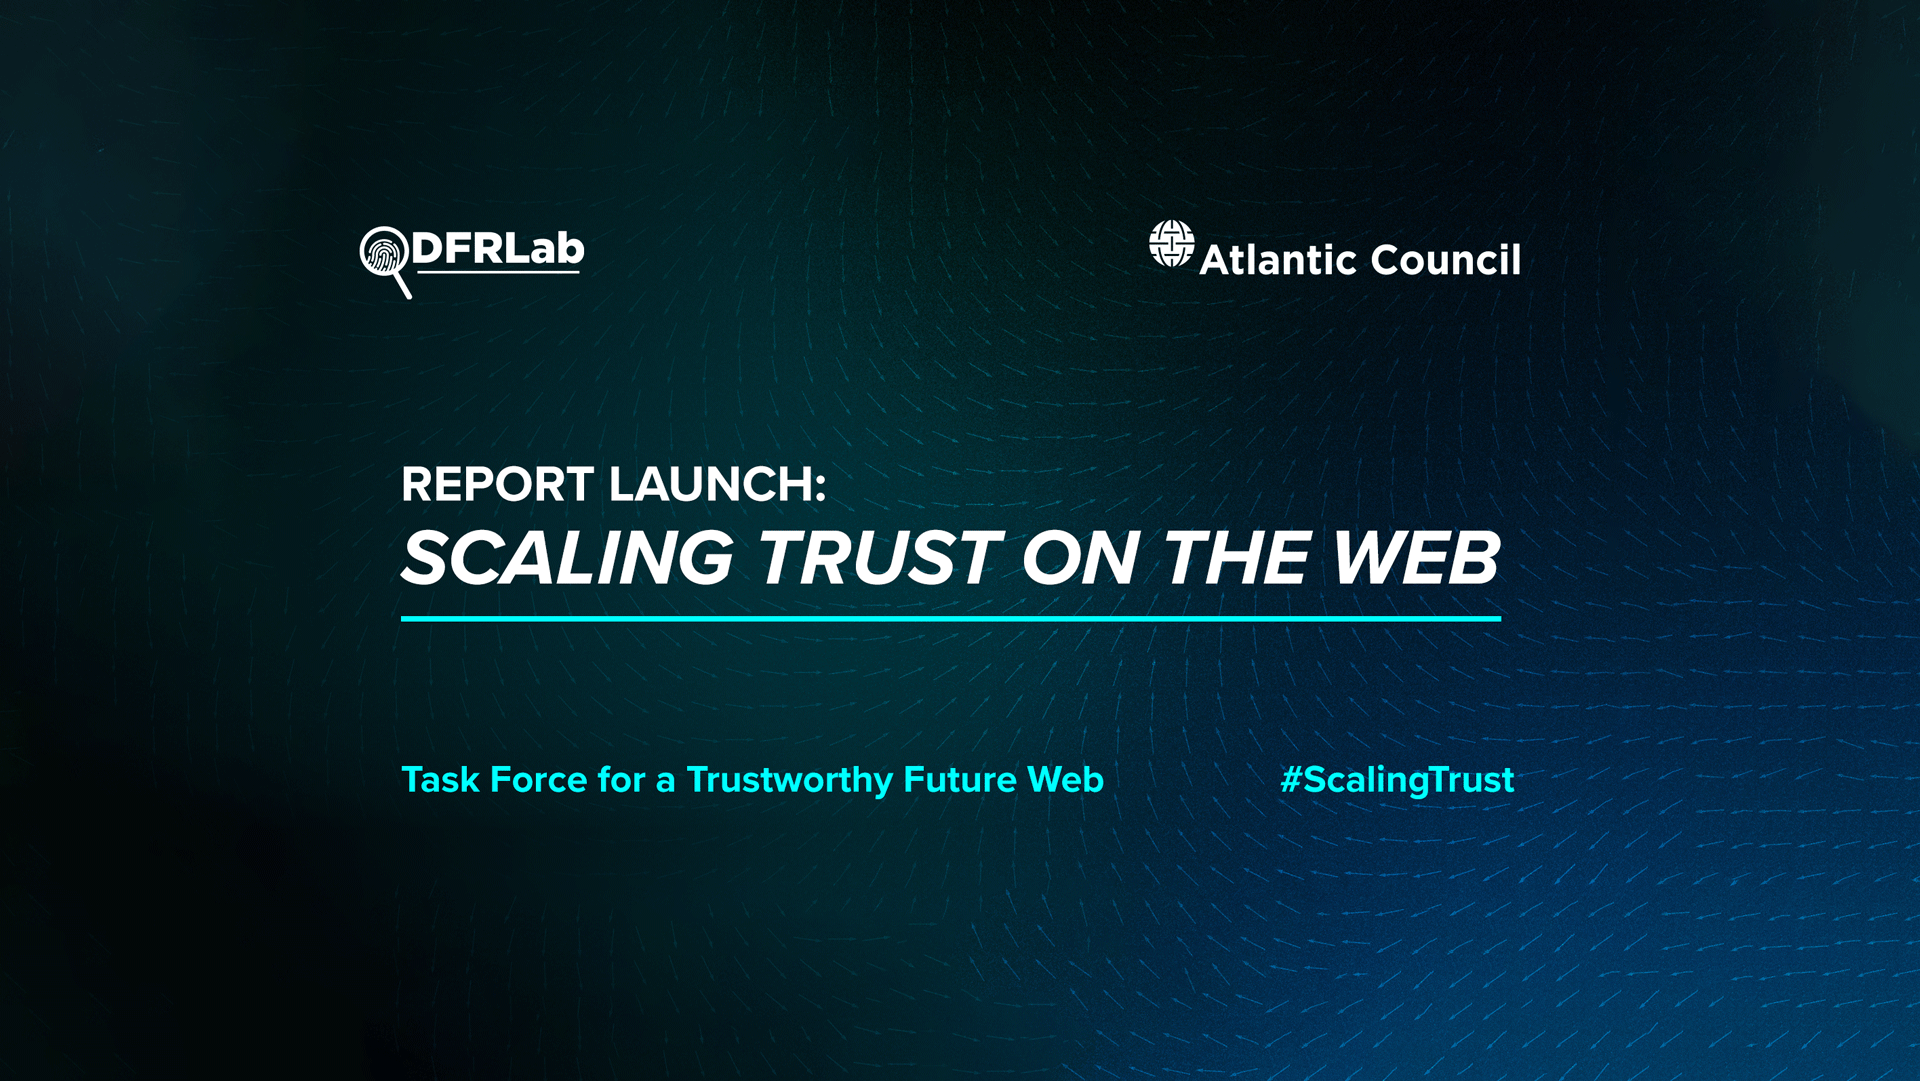 Task Force for a Trustworthy Future Web launches final report Scaling Trust on the Web